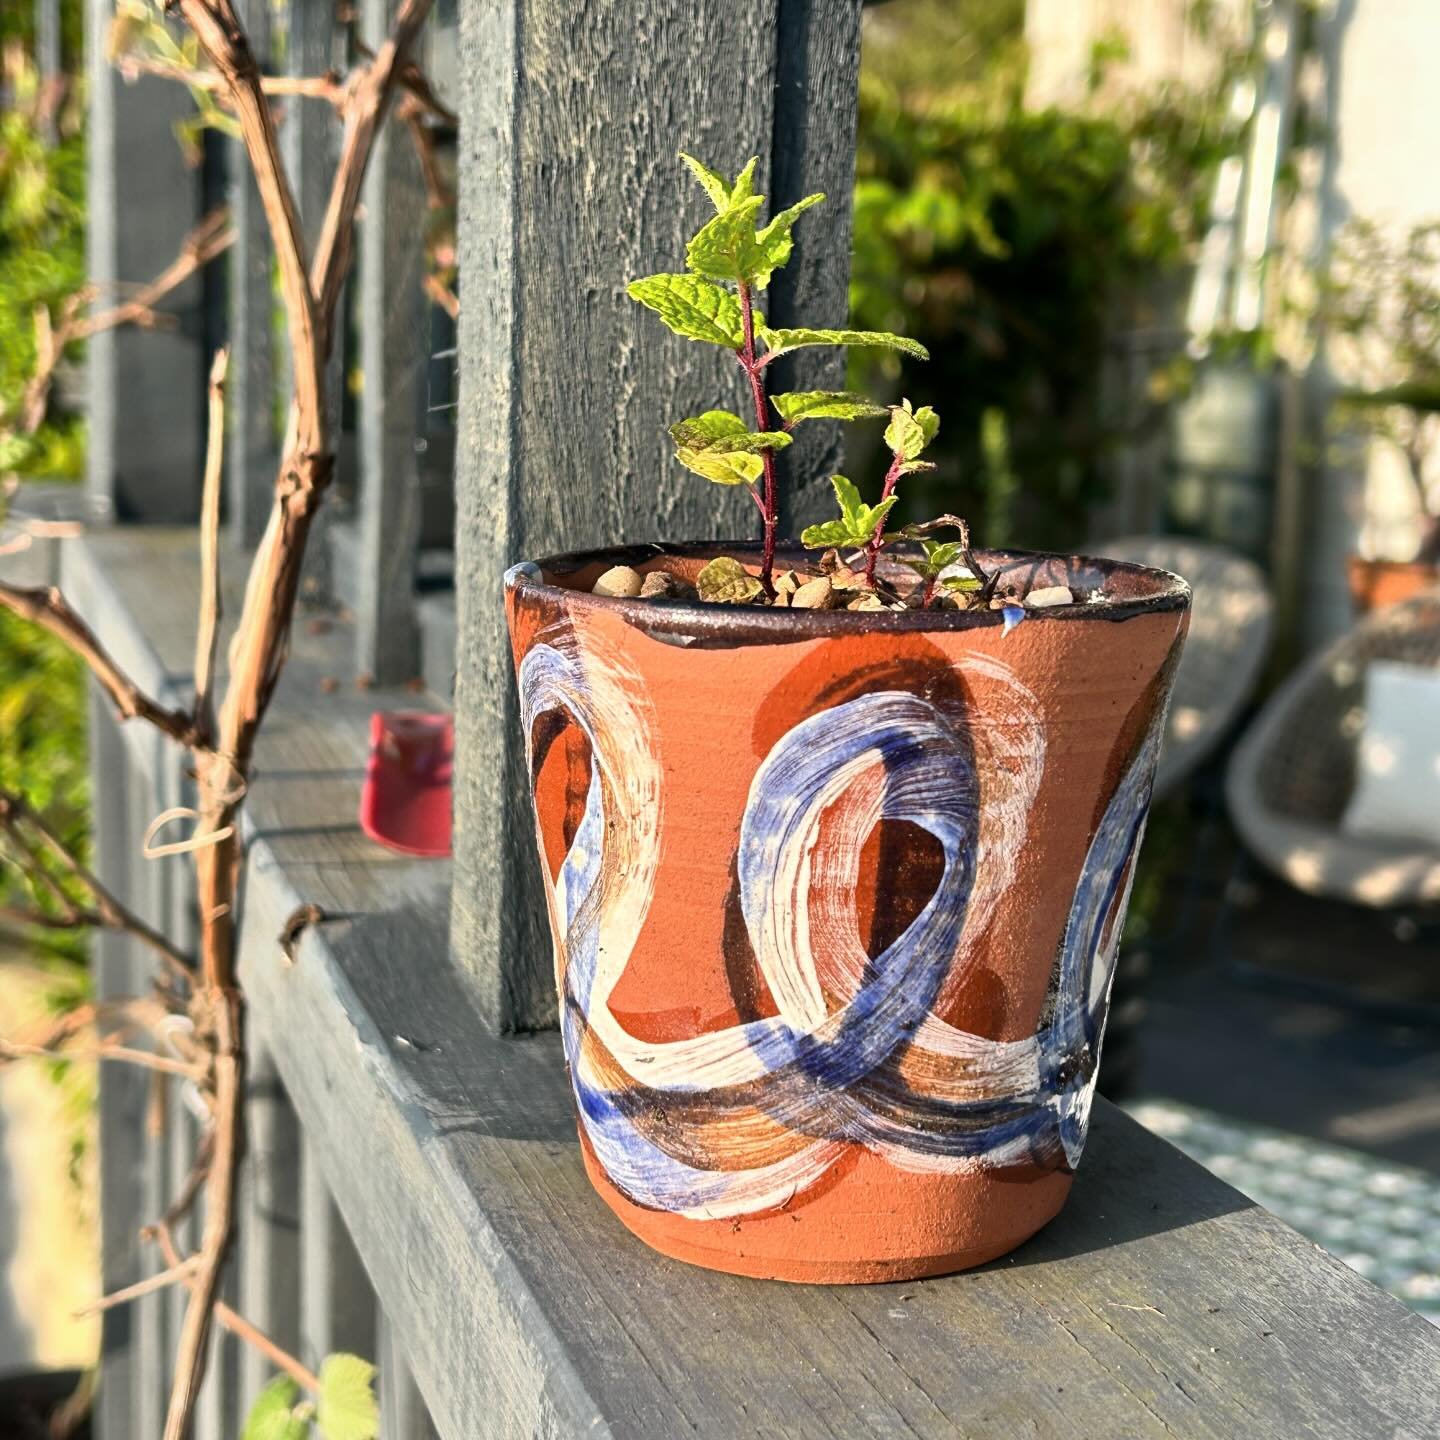 Terracotta plantpot with slip and glaze decoration. 
First finished pots coming through from an idea I&rsquo;ve been playing with for a while. Any thoughts?
#plantpot #terracotta #gardening #mint